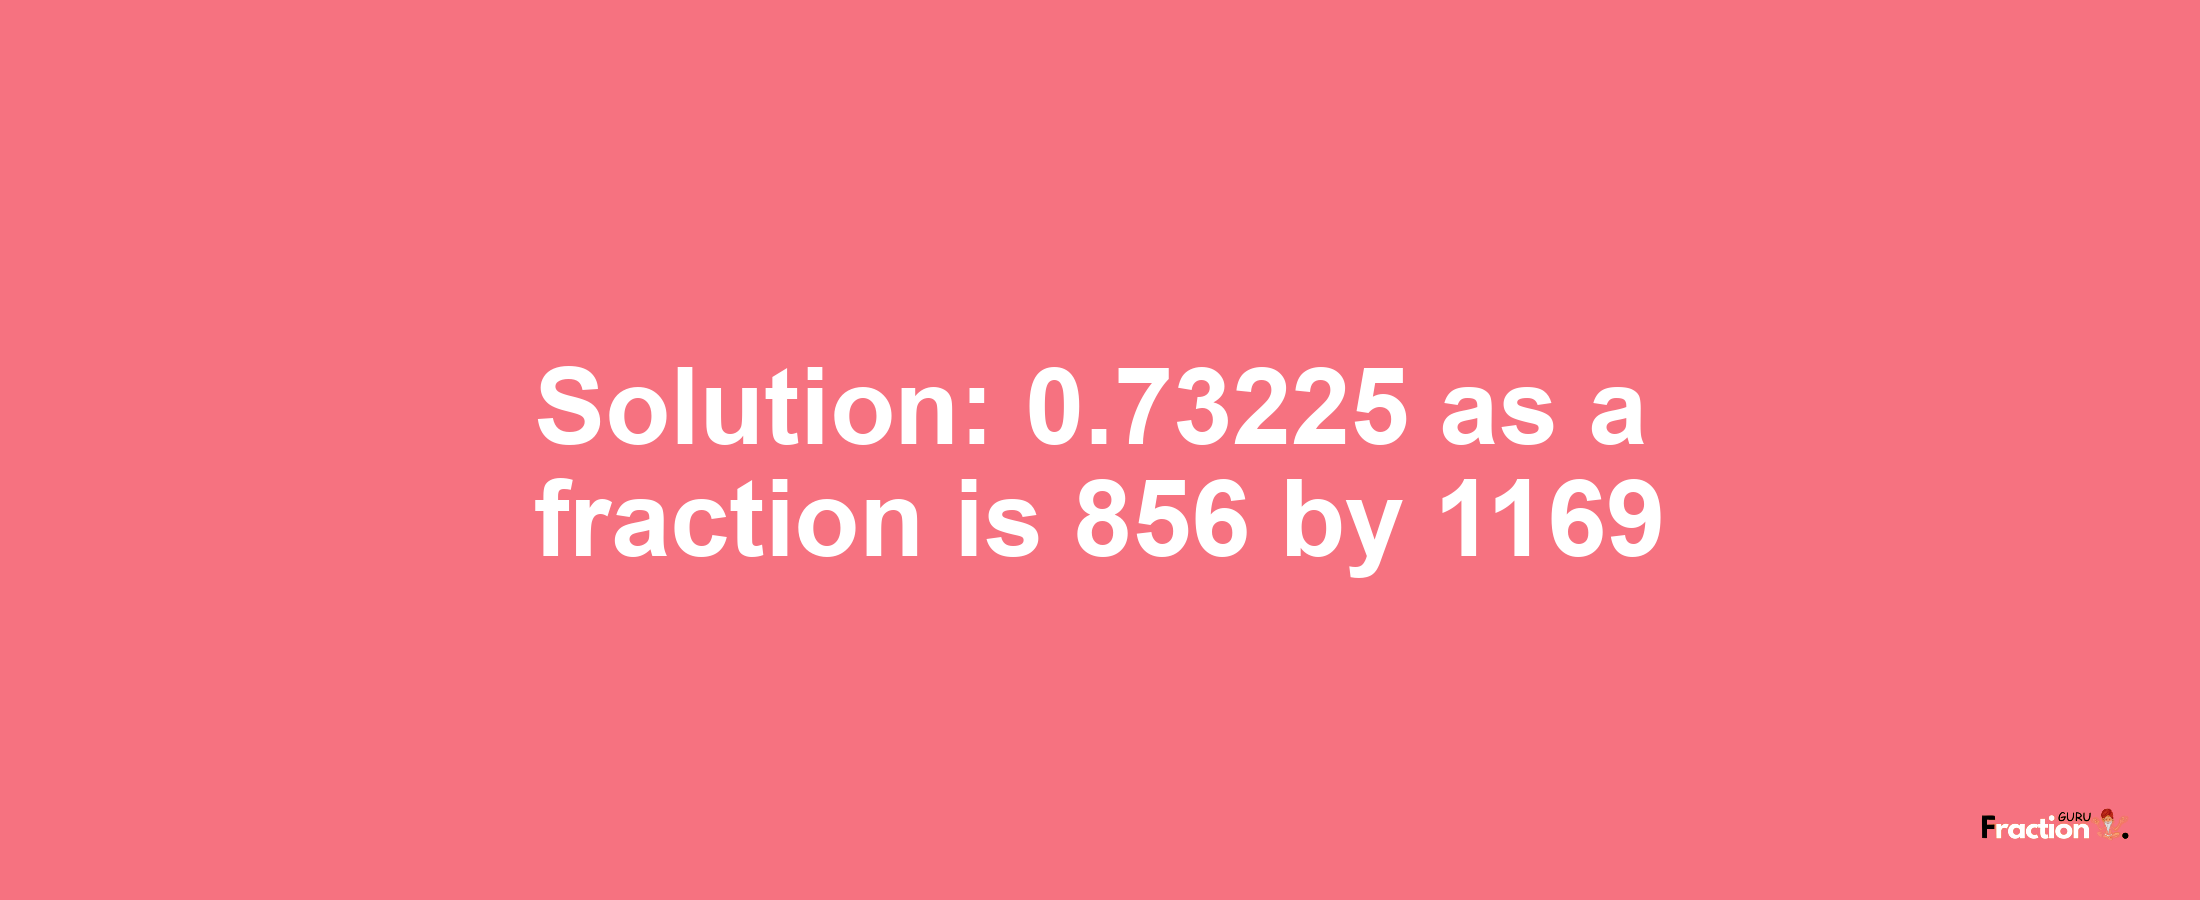 Solution:0.73225 as a fraction is 856/1169